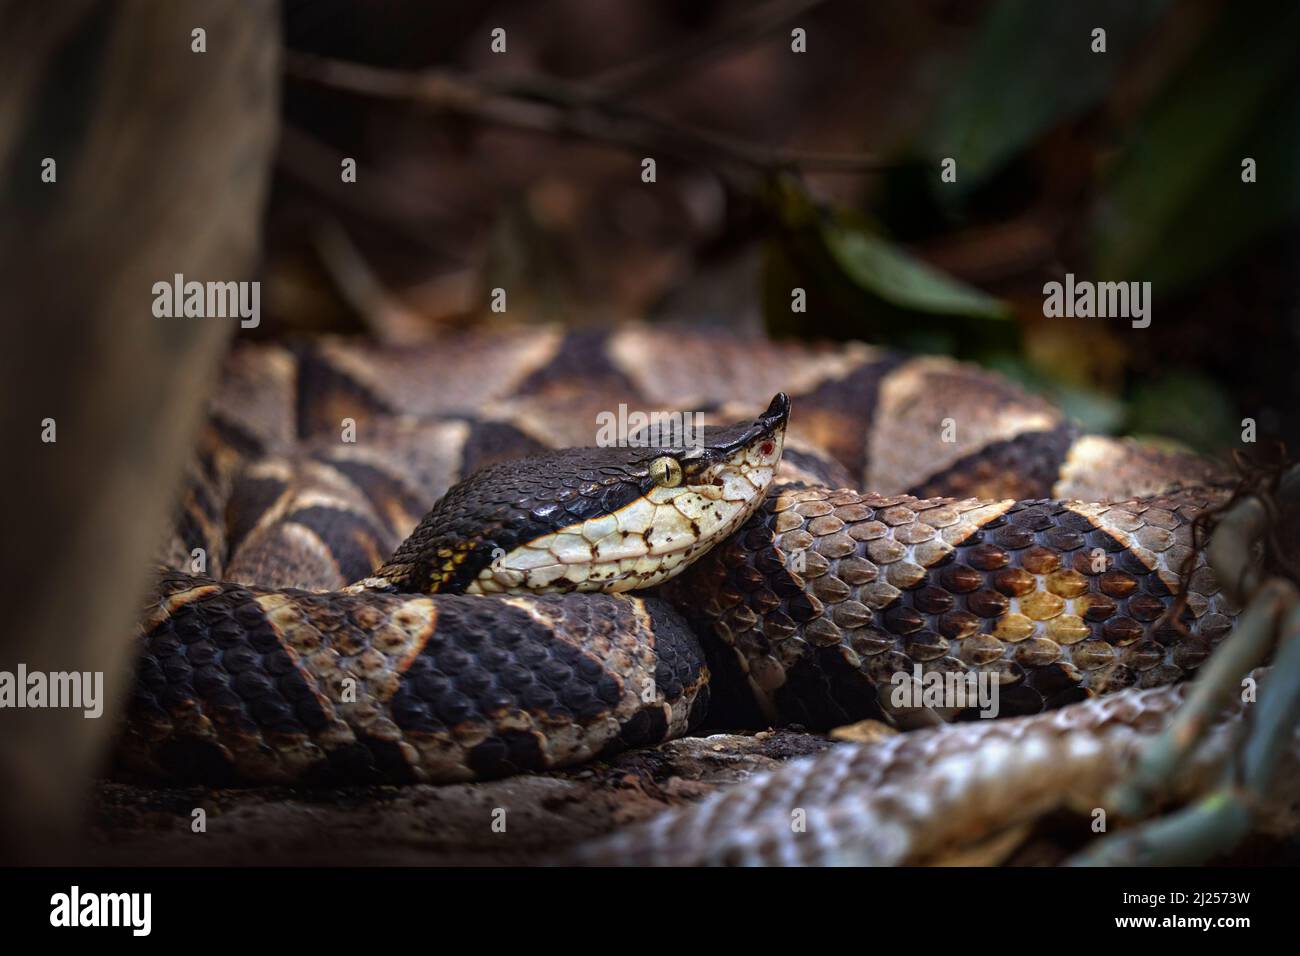 Sharp-nosed Pit Viper, Chinese Moccasin, Deinagkistrodon acutus, venomous snake viper species, D. acutus, endemic to Southeast Asia, Animal from Thail Stock Photo